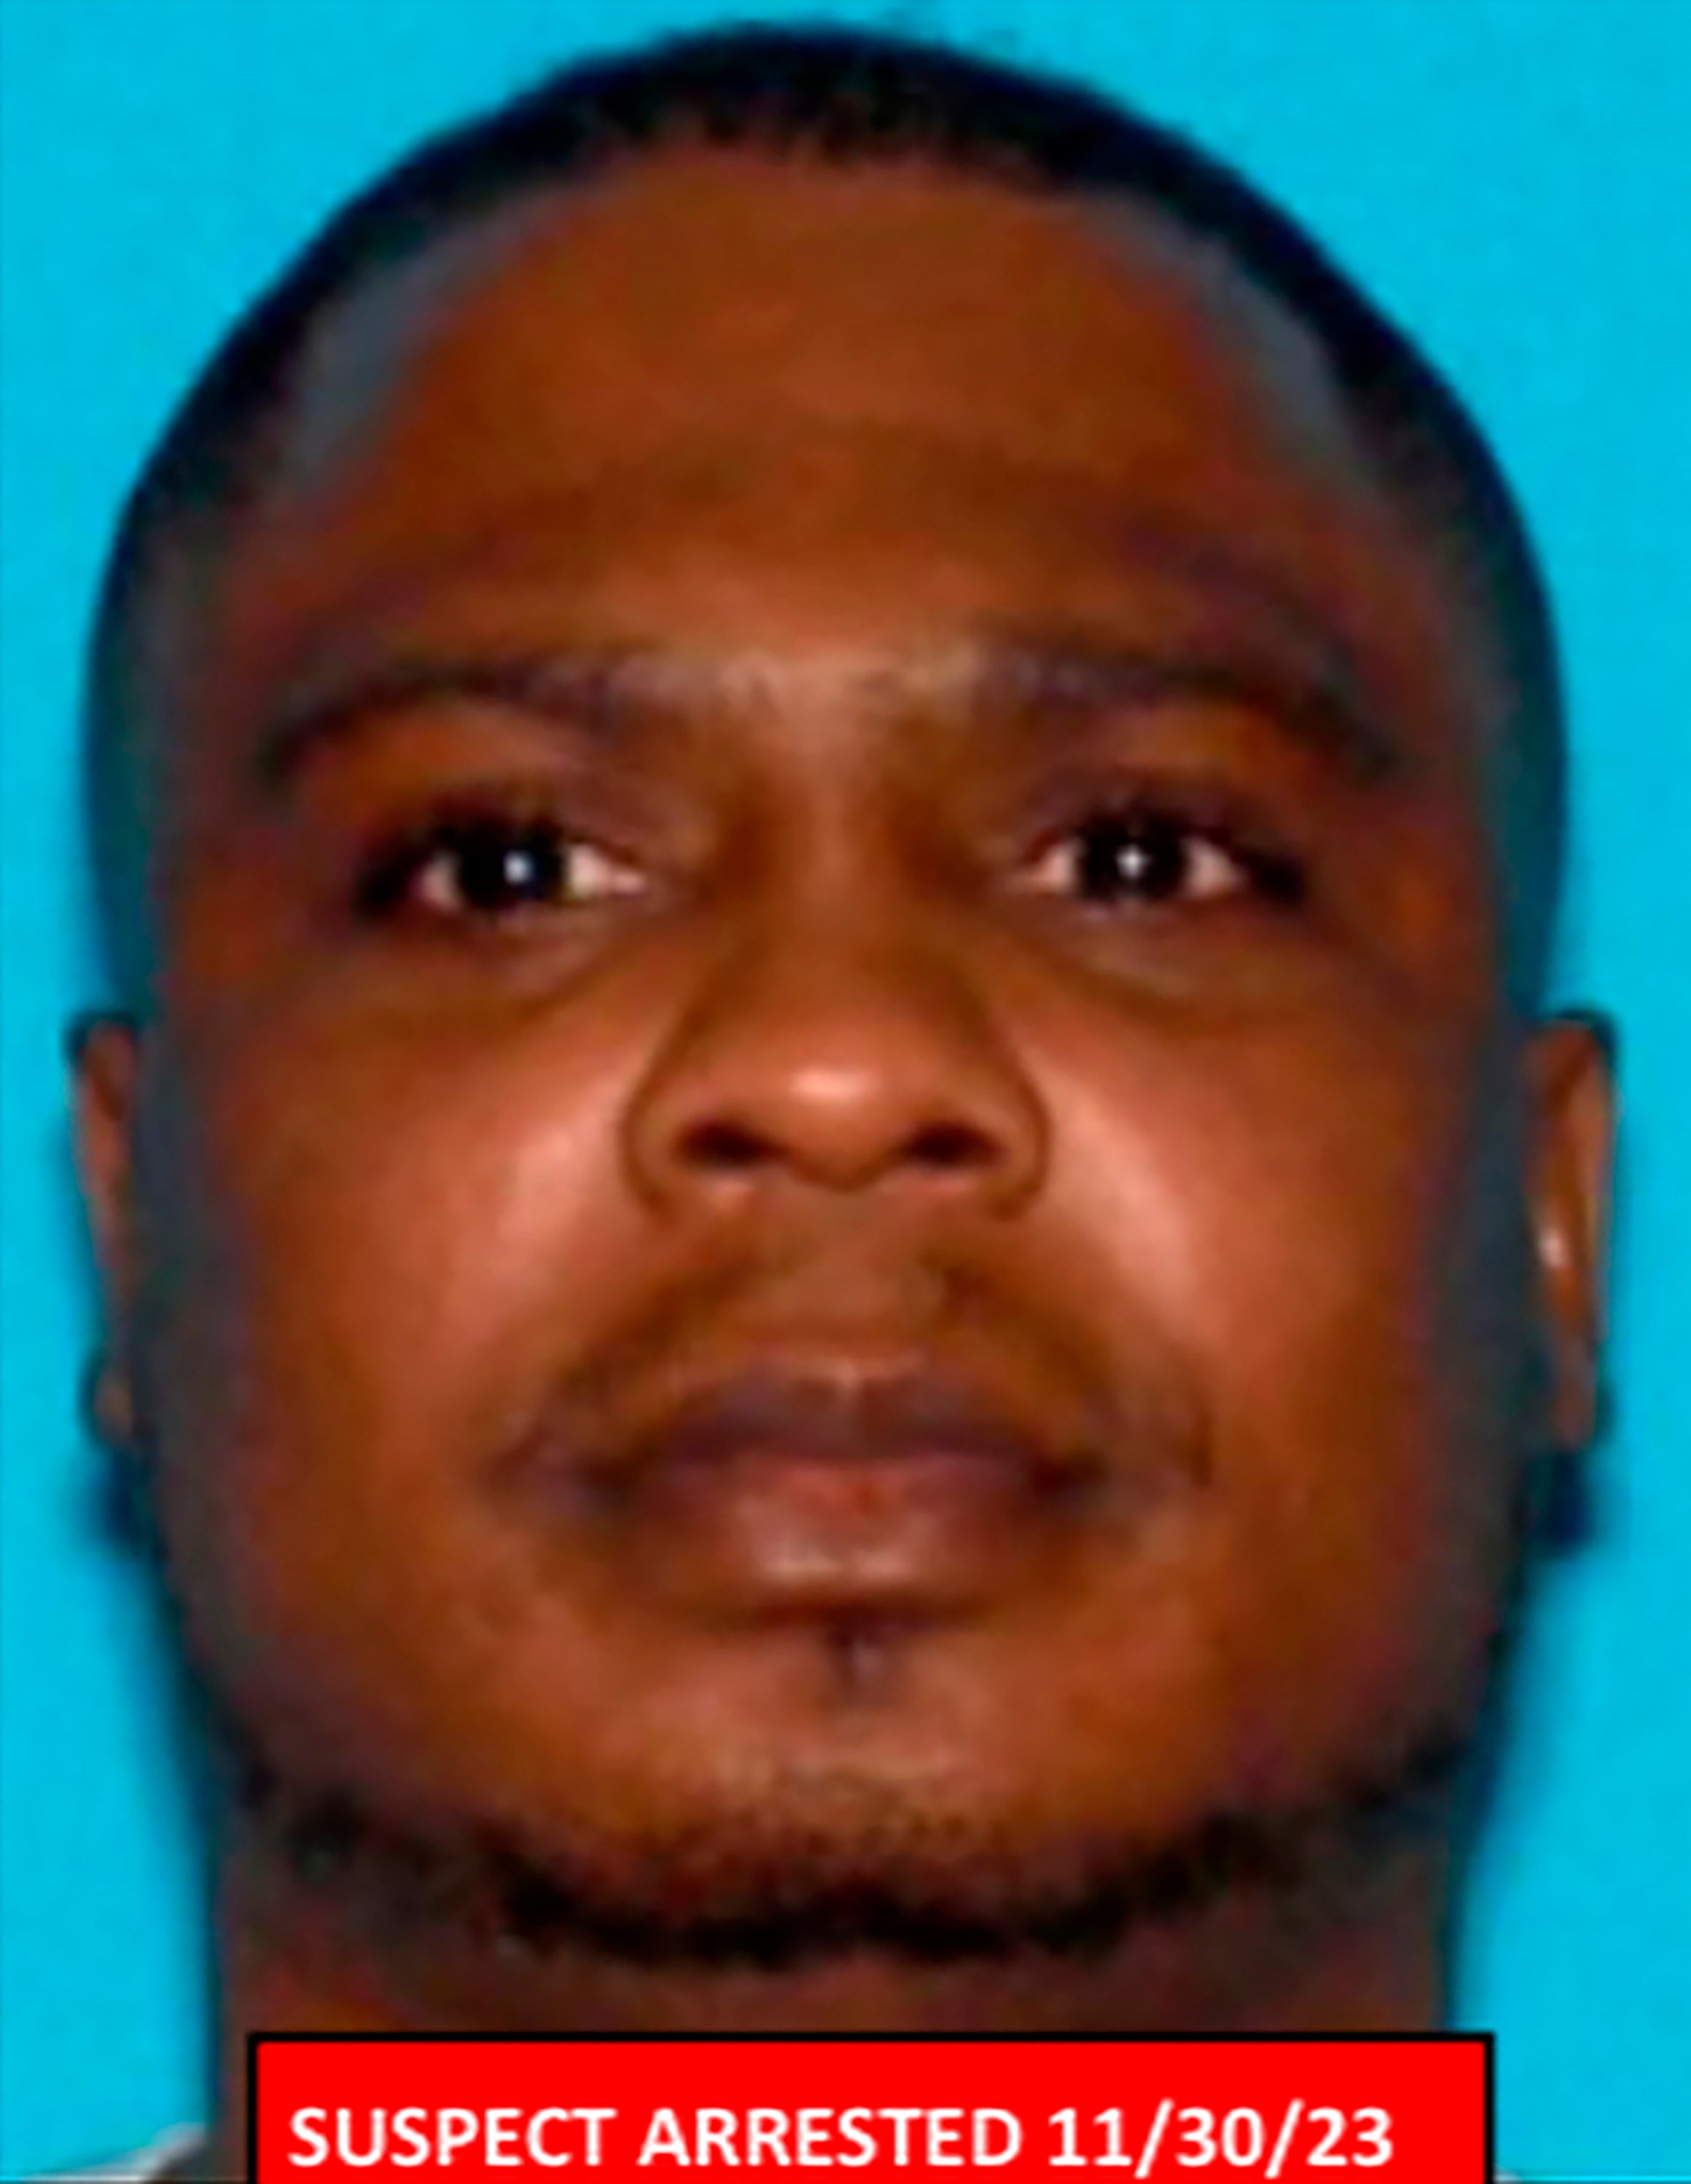 This photo was released by the Los Angeles County Sheriff's Department as they hunted suspect Jerrid Joseph Powell